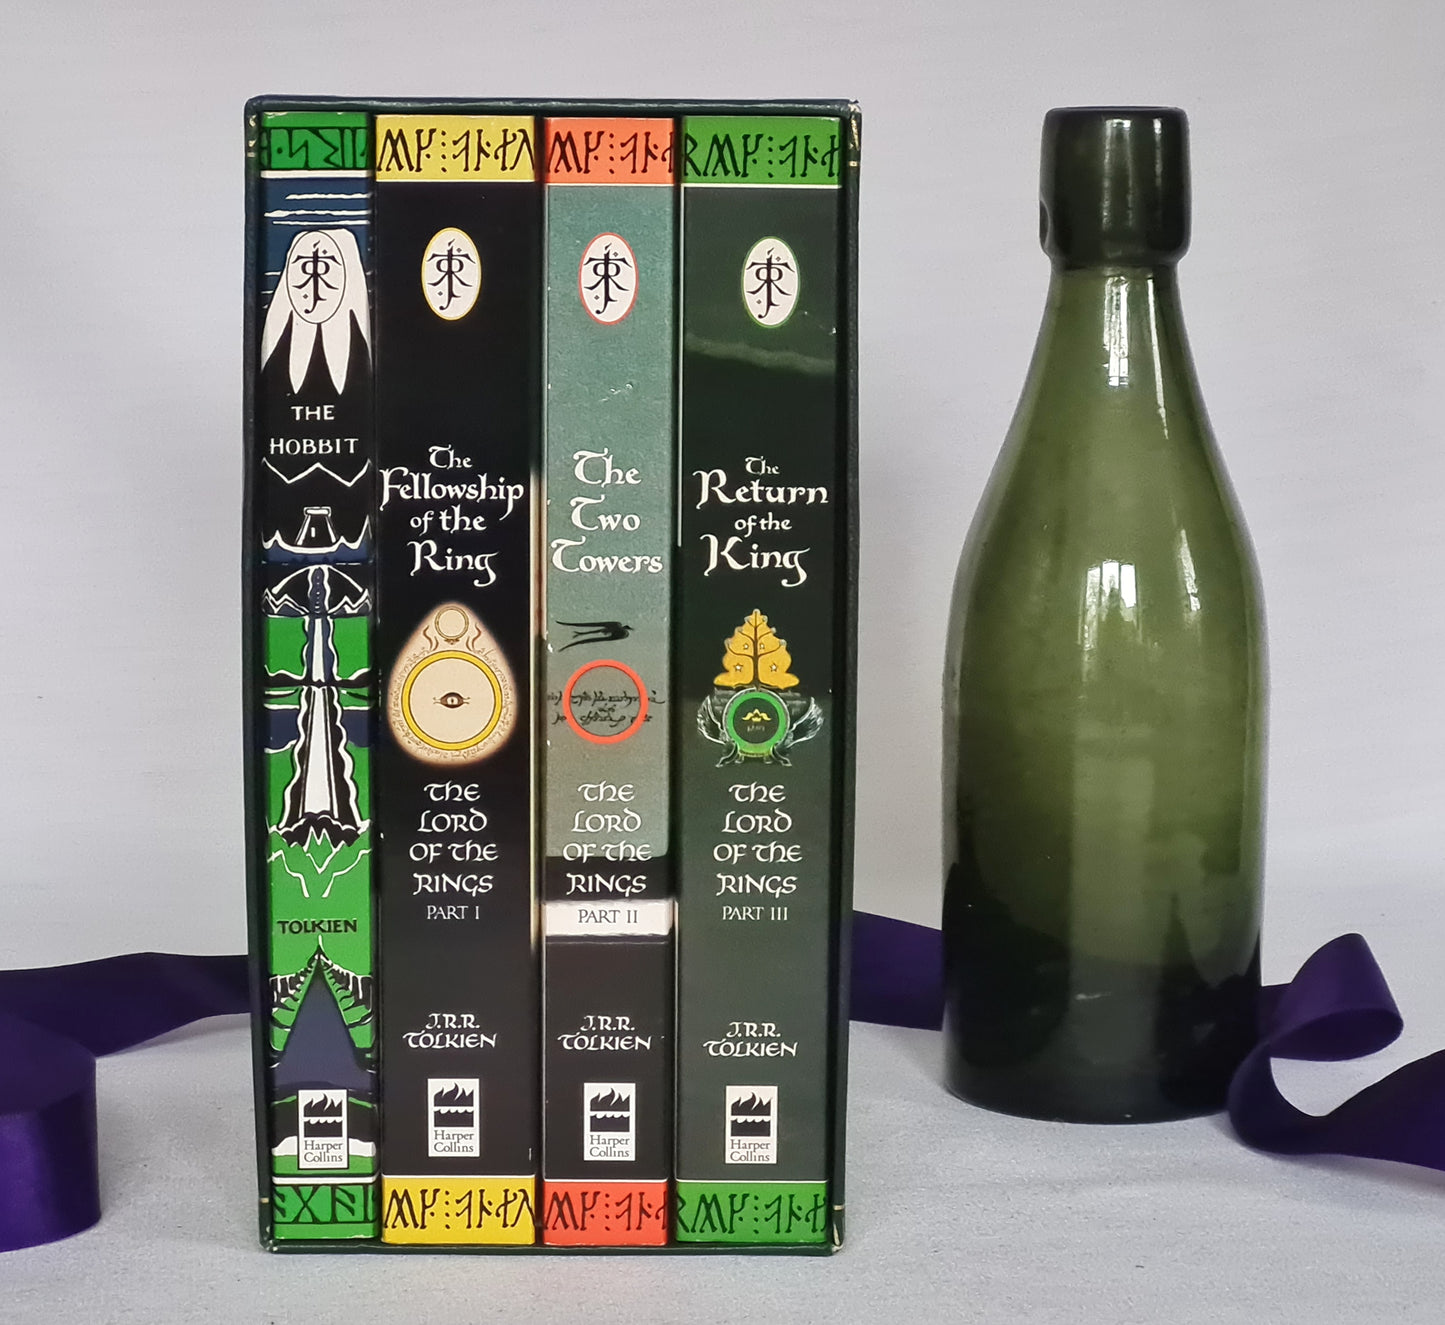 1997 Shrink Wrapped Unopened JRR Tolkien Boxed Set The Hobbit and The Lord of the Rings Trilogy / In Excellent Condition / Ted Smart, London